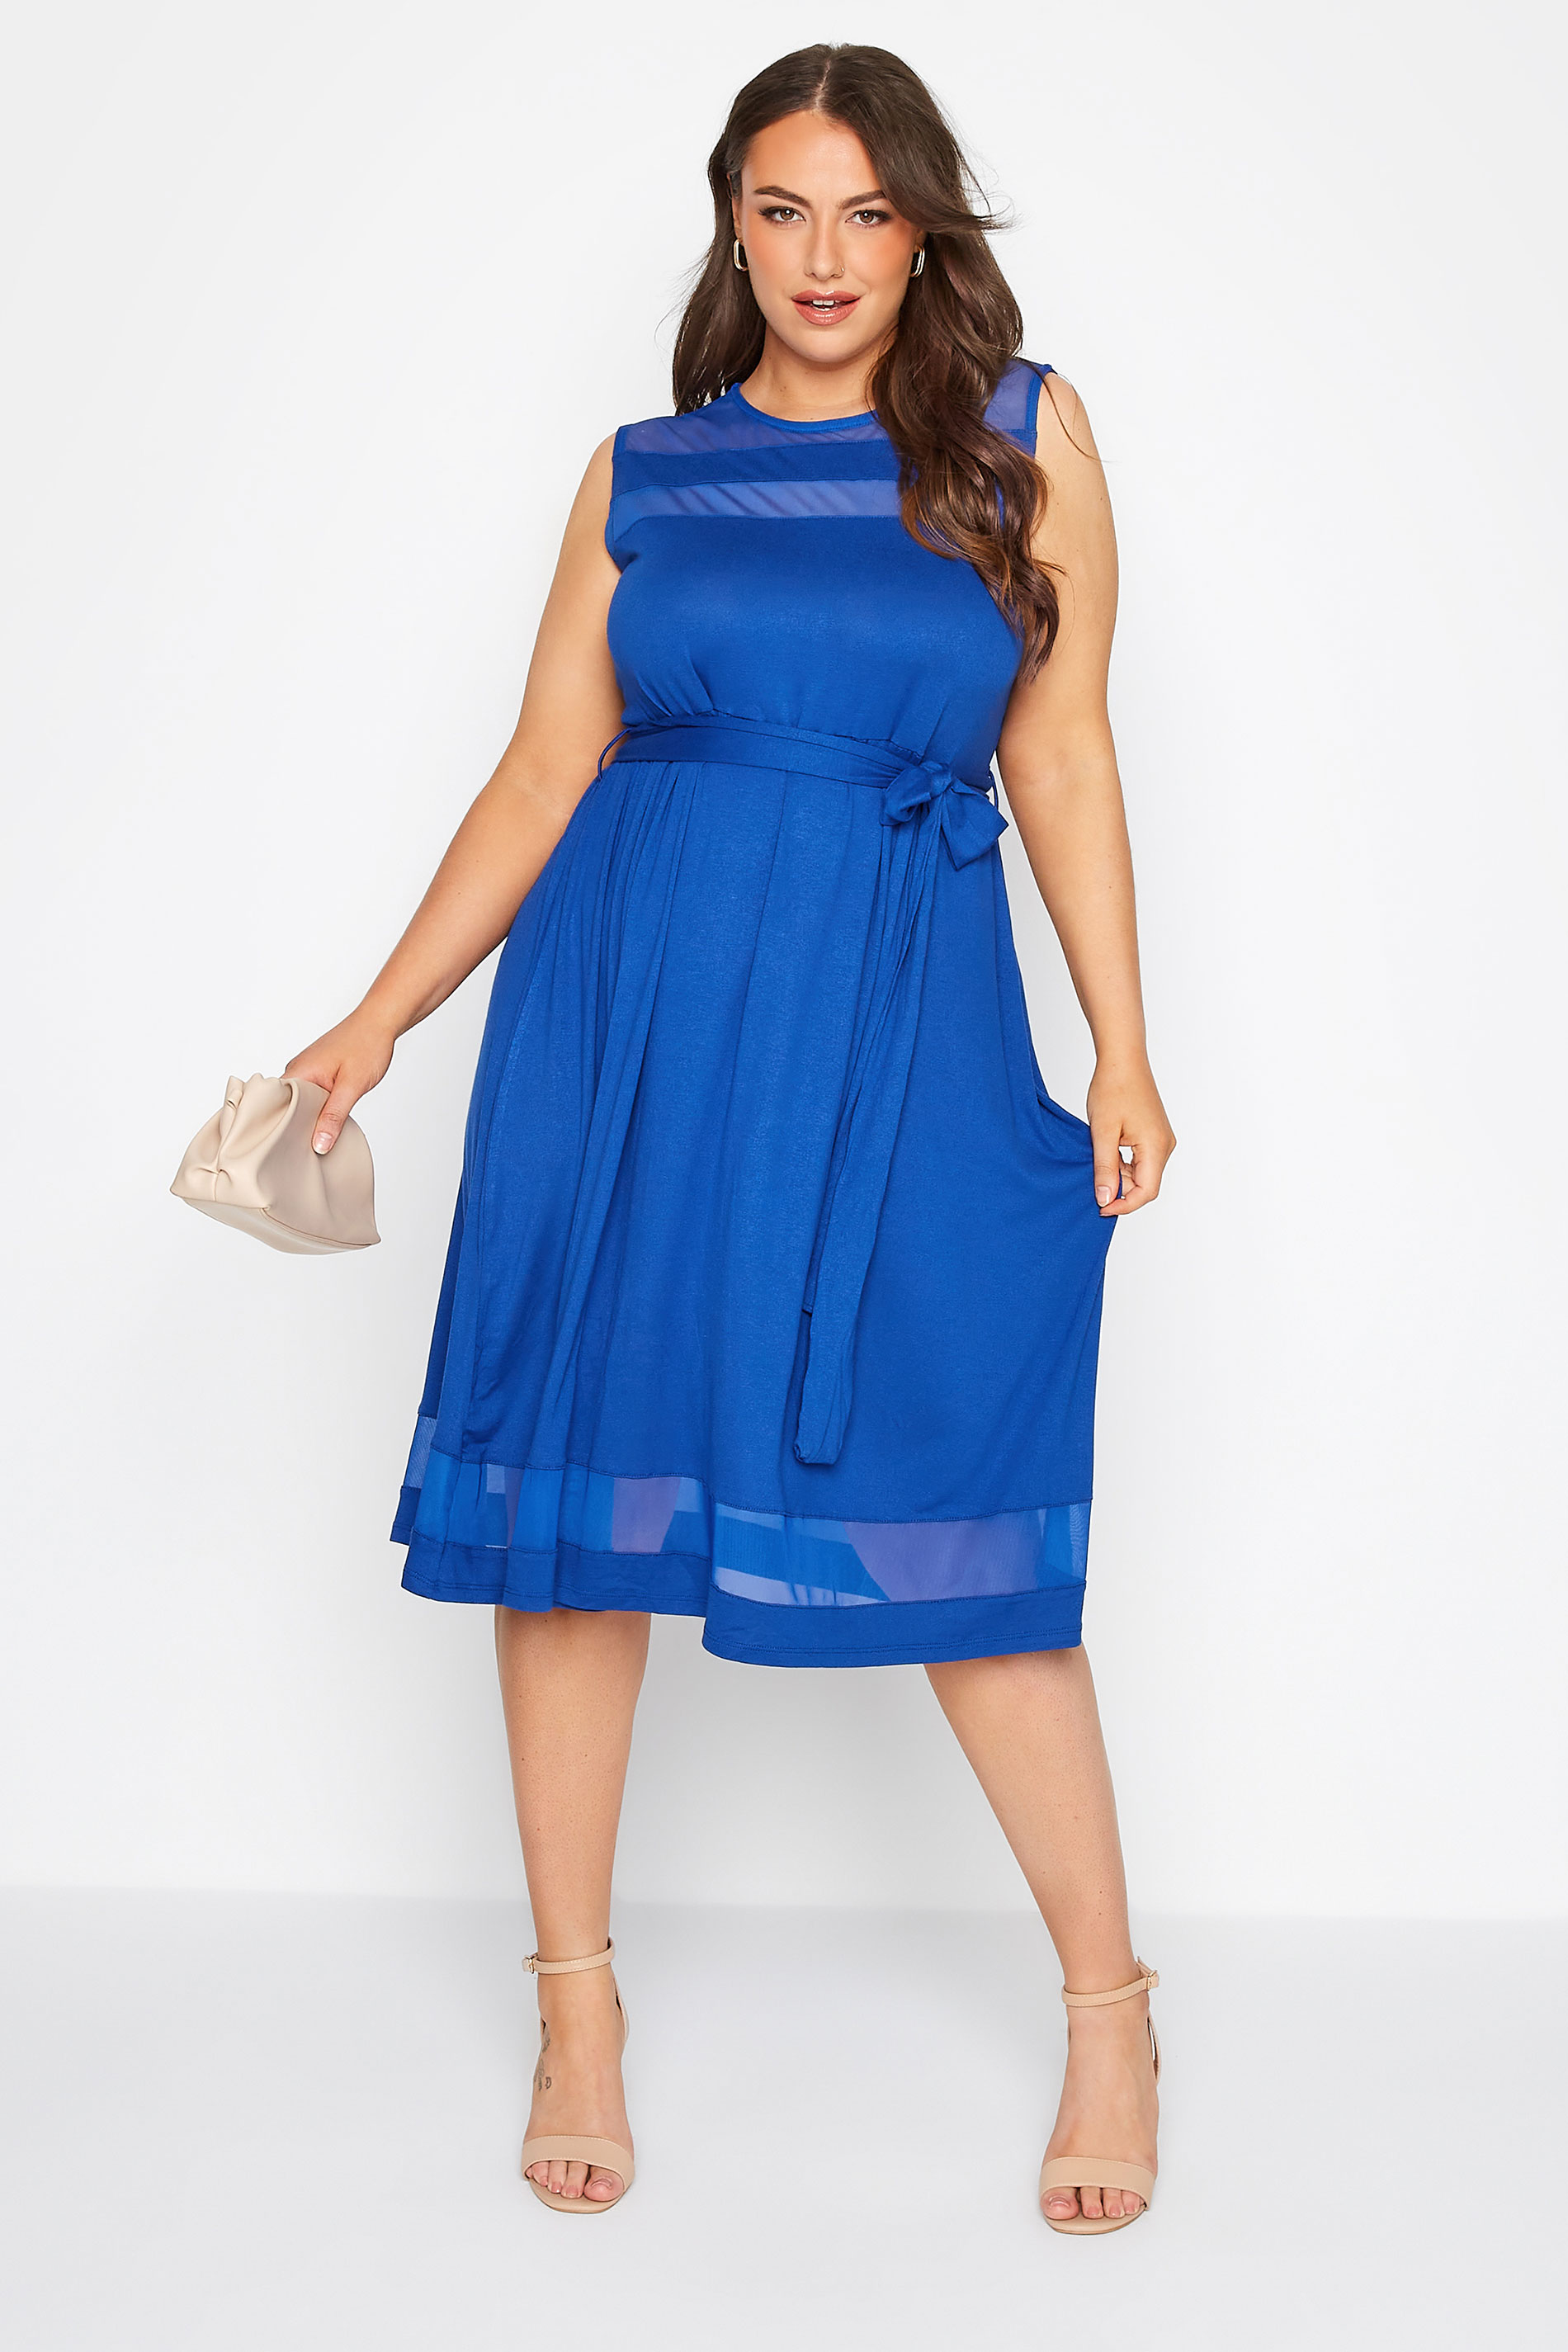 Robes Grande Taille Grande taille  Robes Patineuses | Curve Cobalt Blue Mesh Panel Skater Dress - OF18941